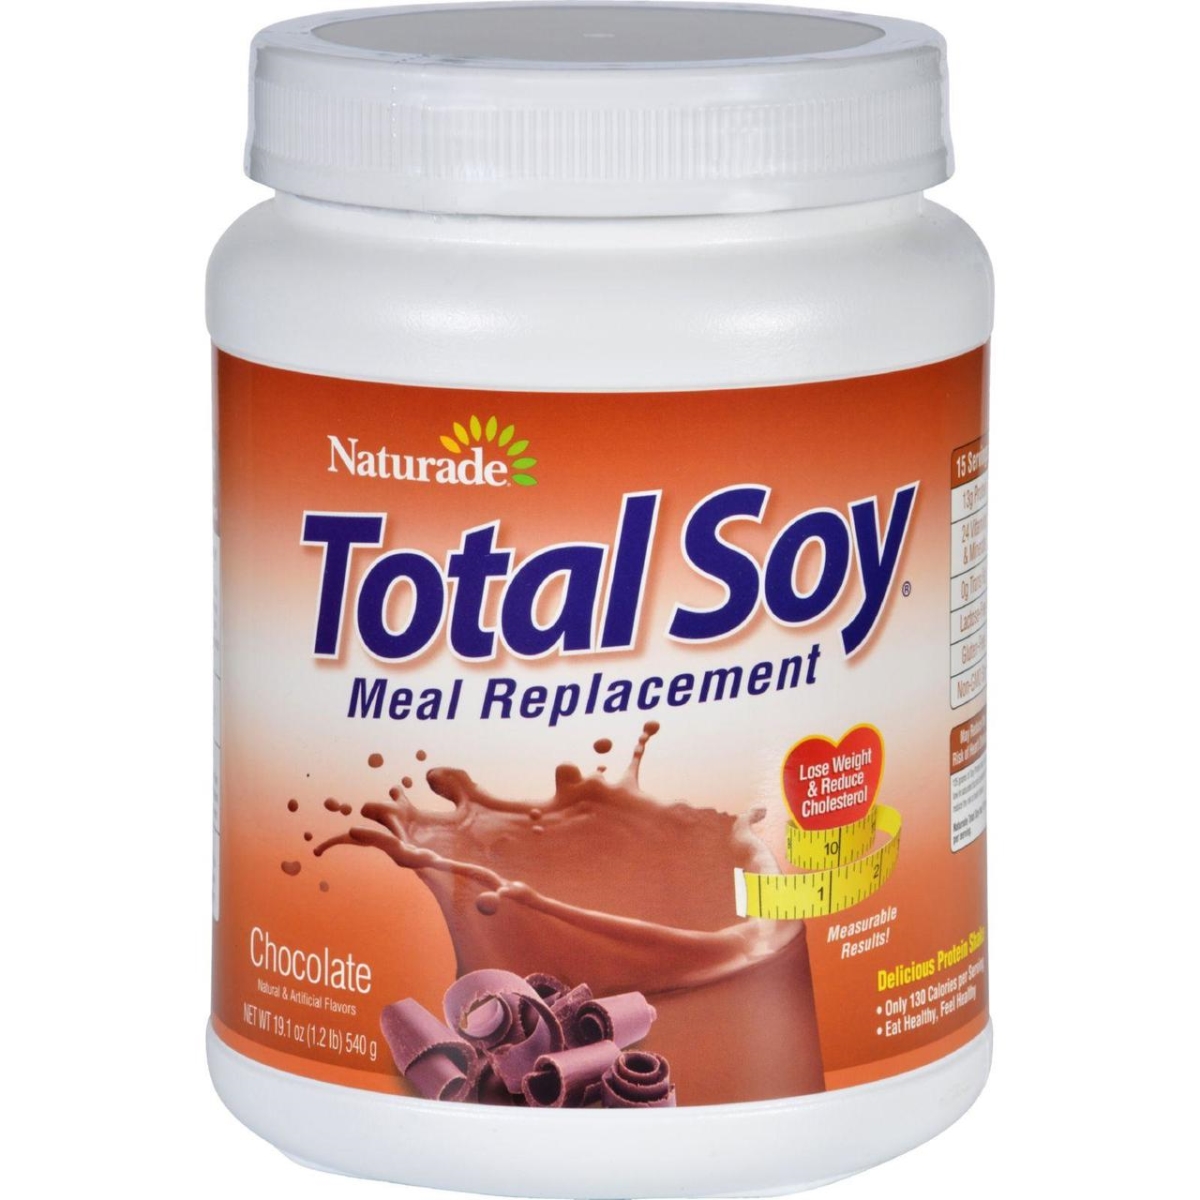 Hg0951681 19.05 Oz Total Soy Meal Replacement - Chocolate